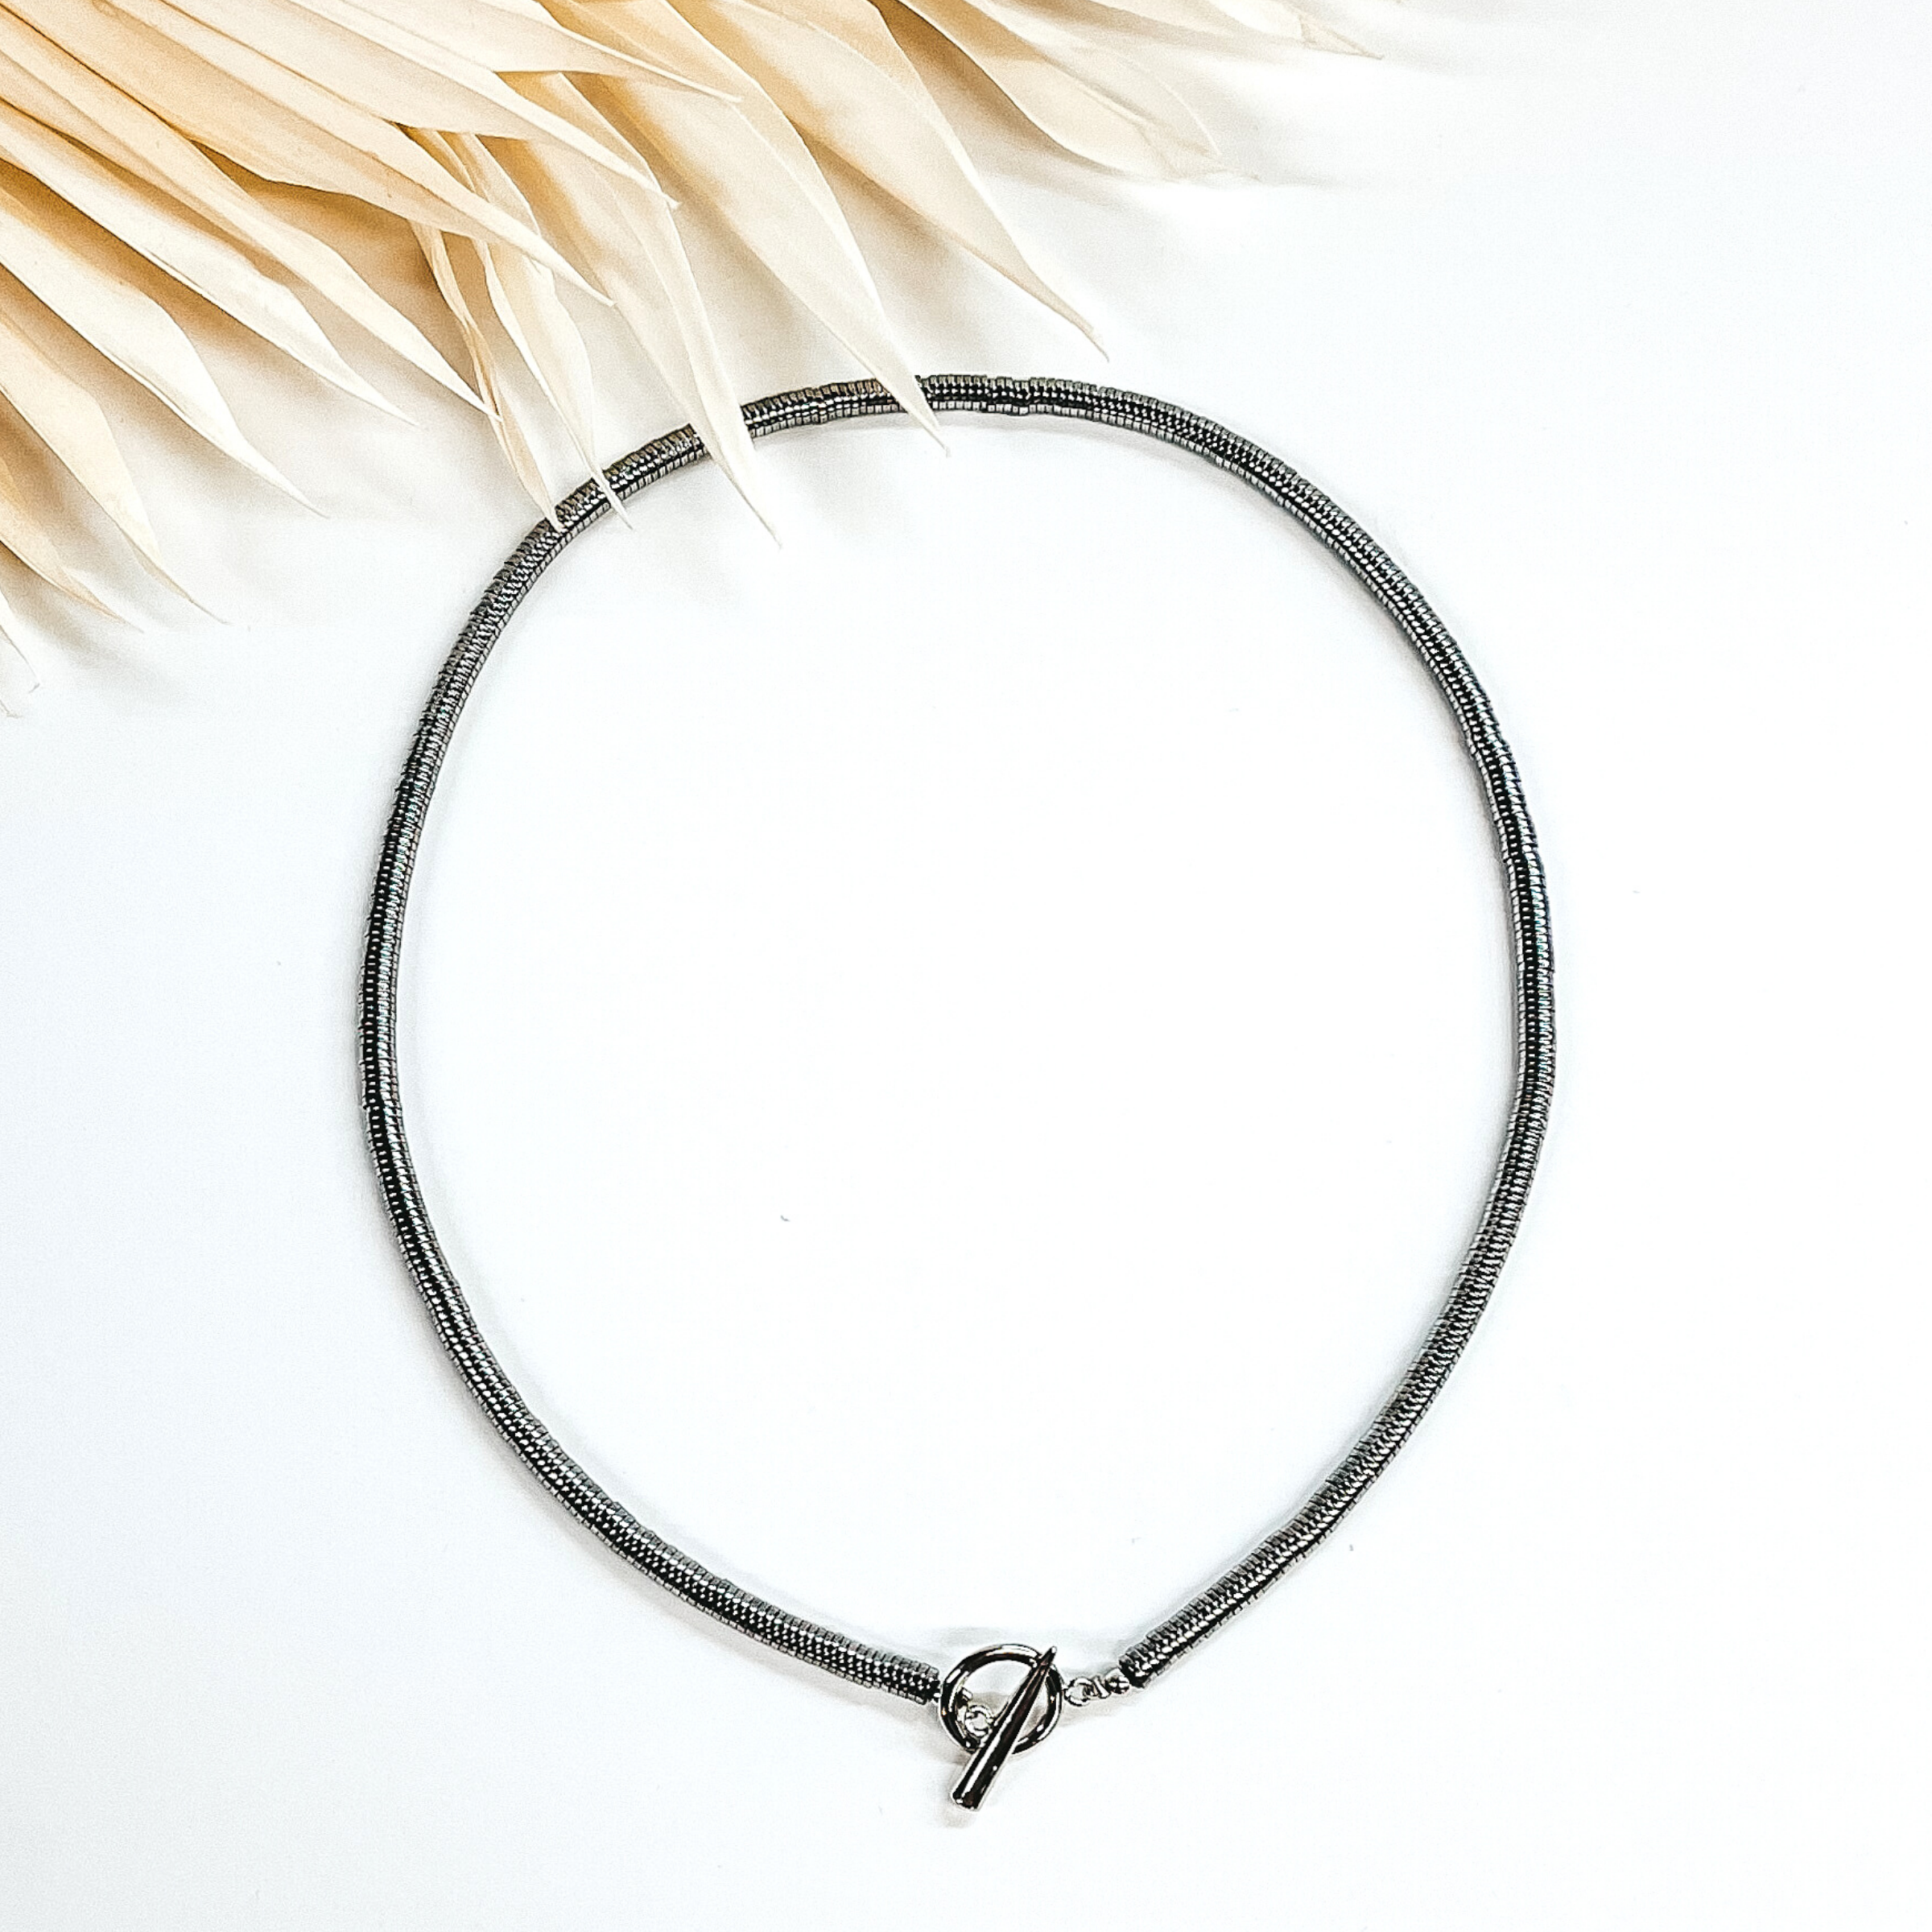 Silver disk beaded necklace with front toggle clasp. This necklace is pictured on a white background with ivory leaves at the top. 